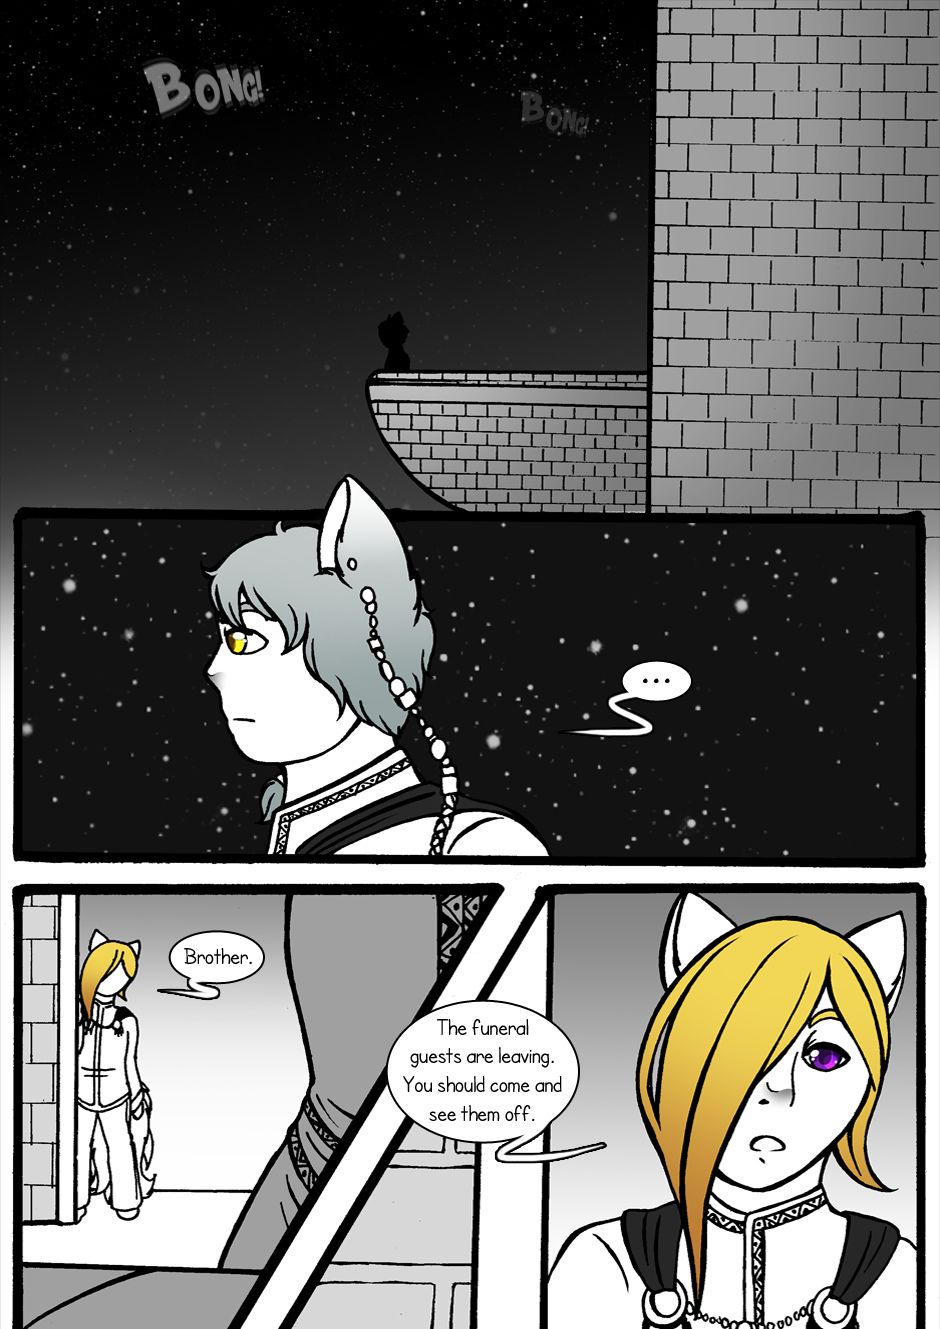 [Jeny-jen94] Between Kings and Queens [Ongoing] 12